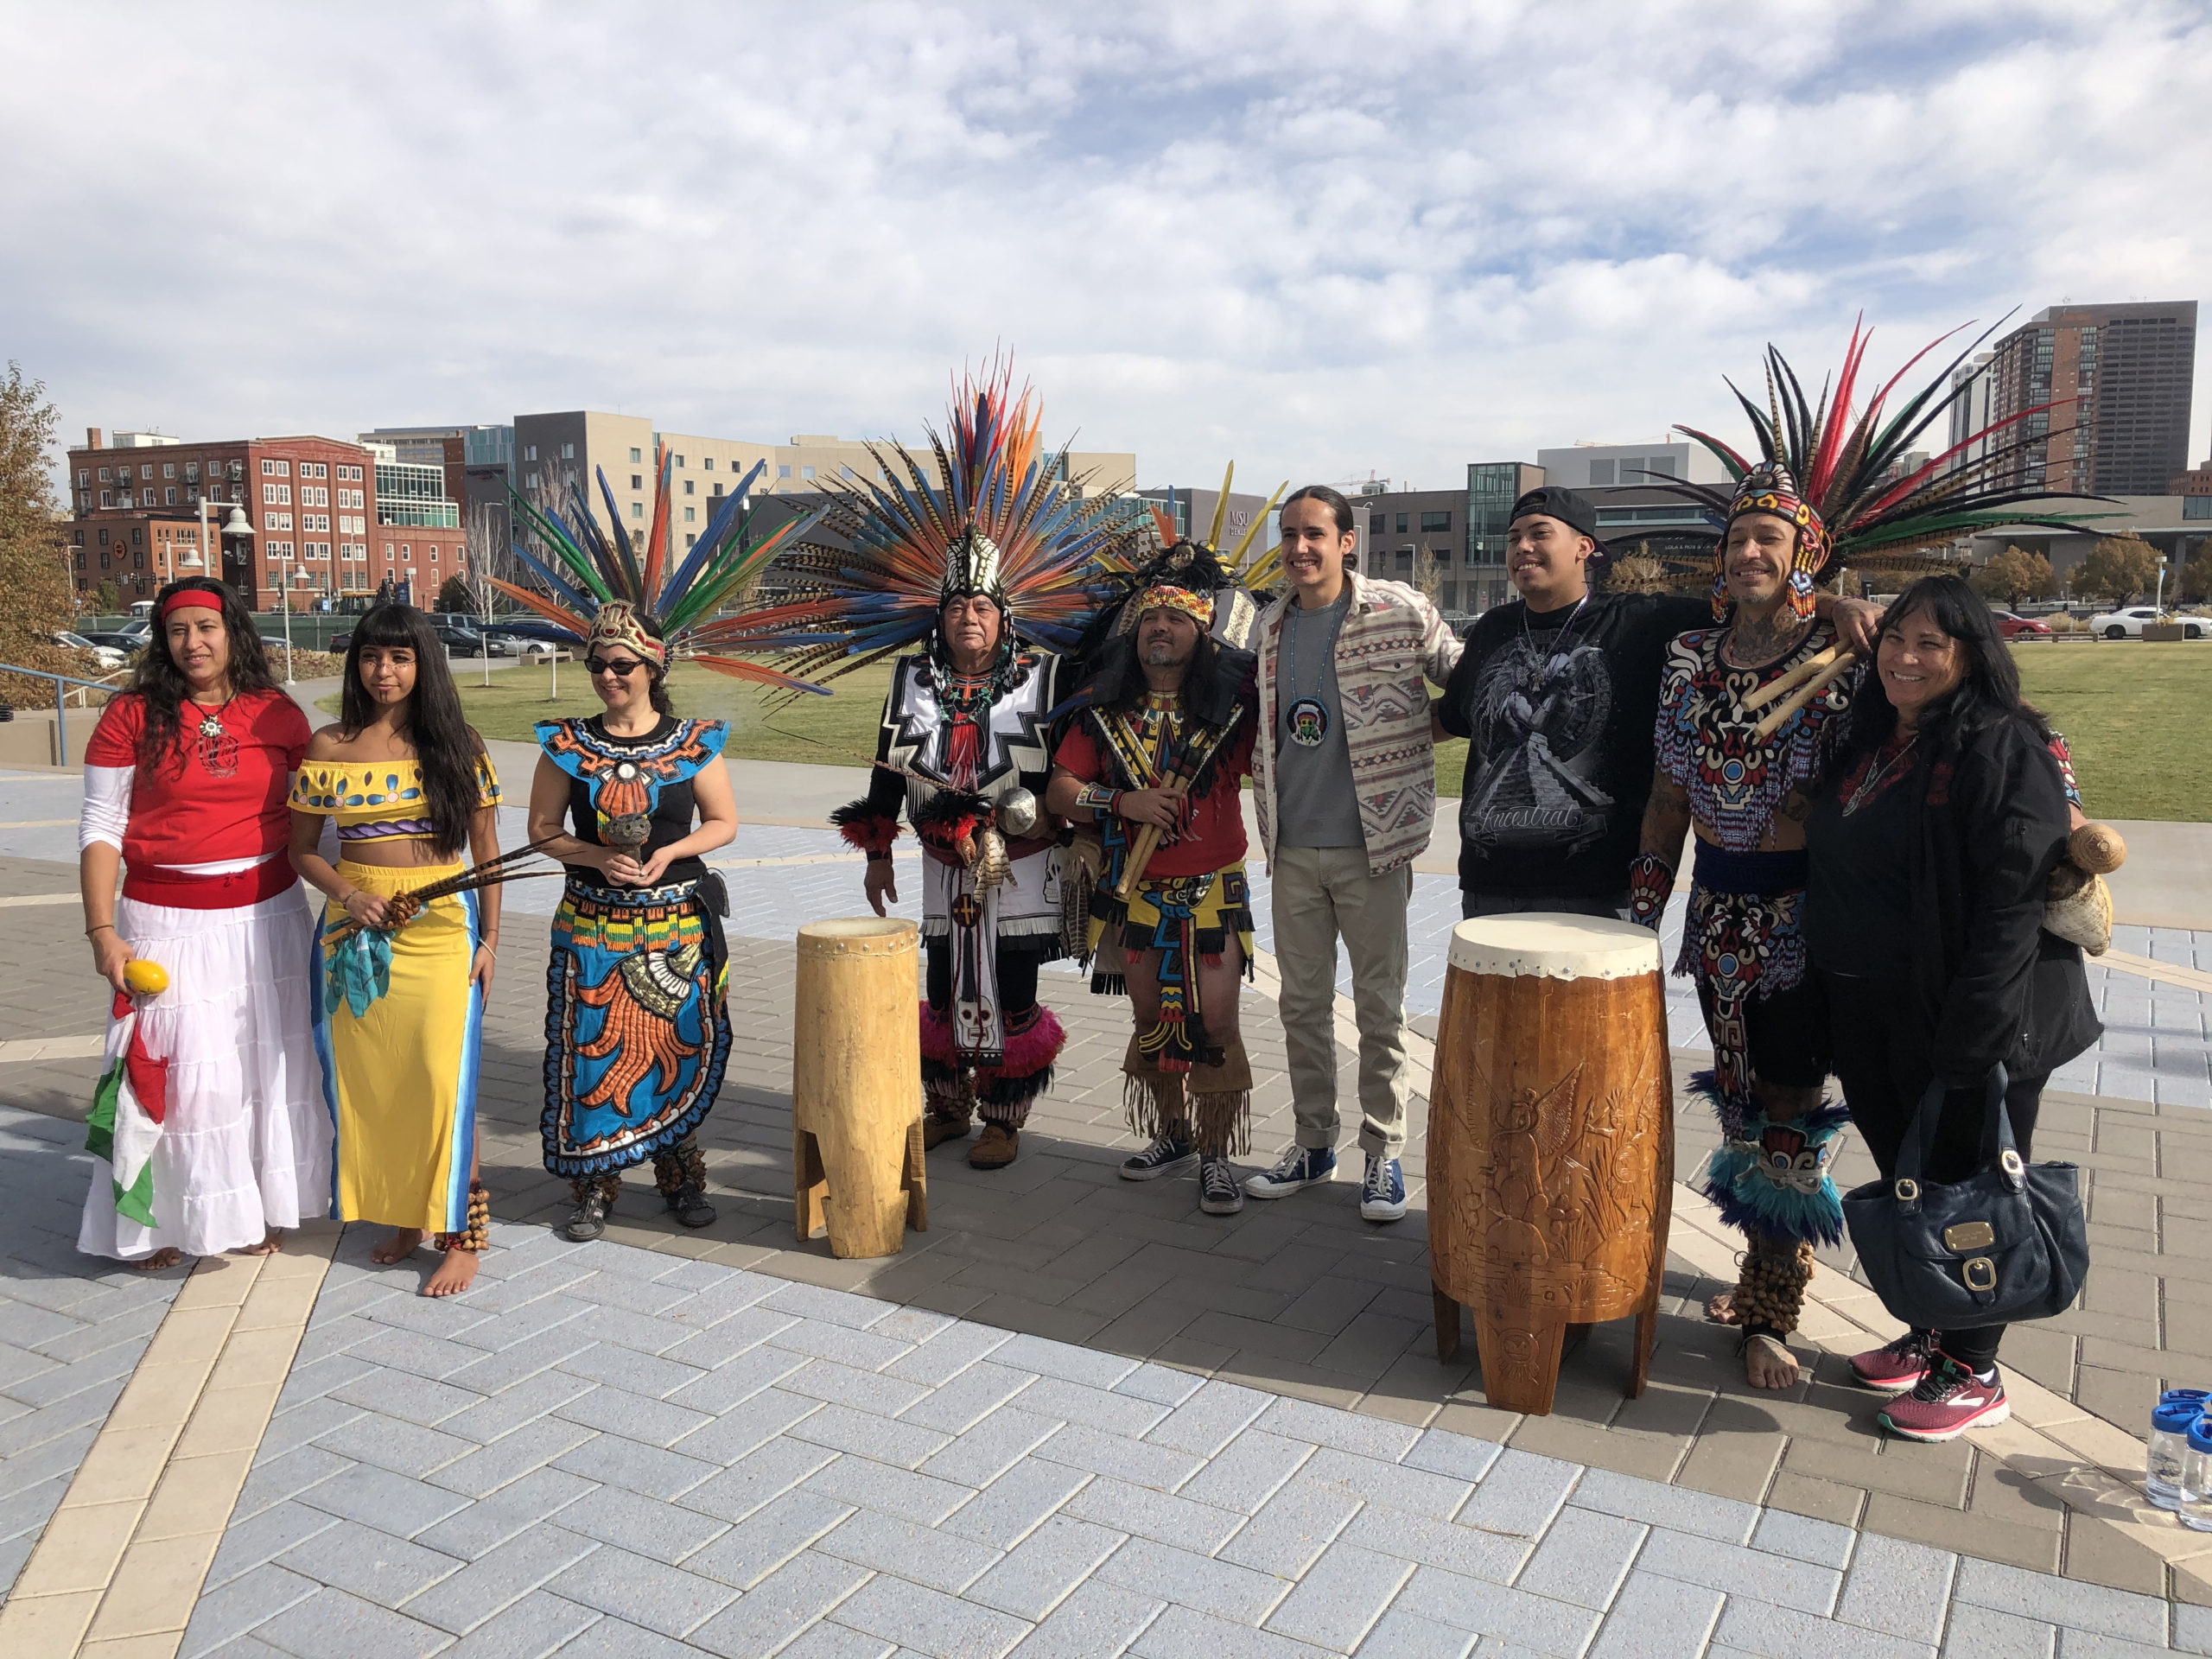 Author Xiuhtezcatl Martinez and a group of Indigenous Dancers posing for a photo